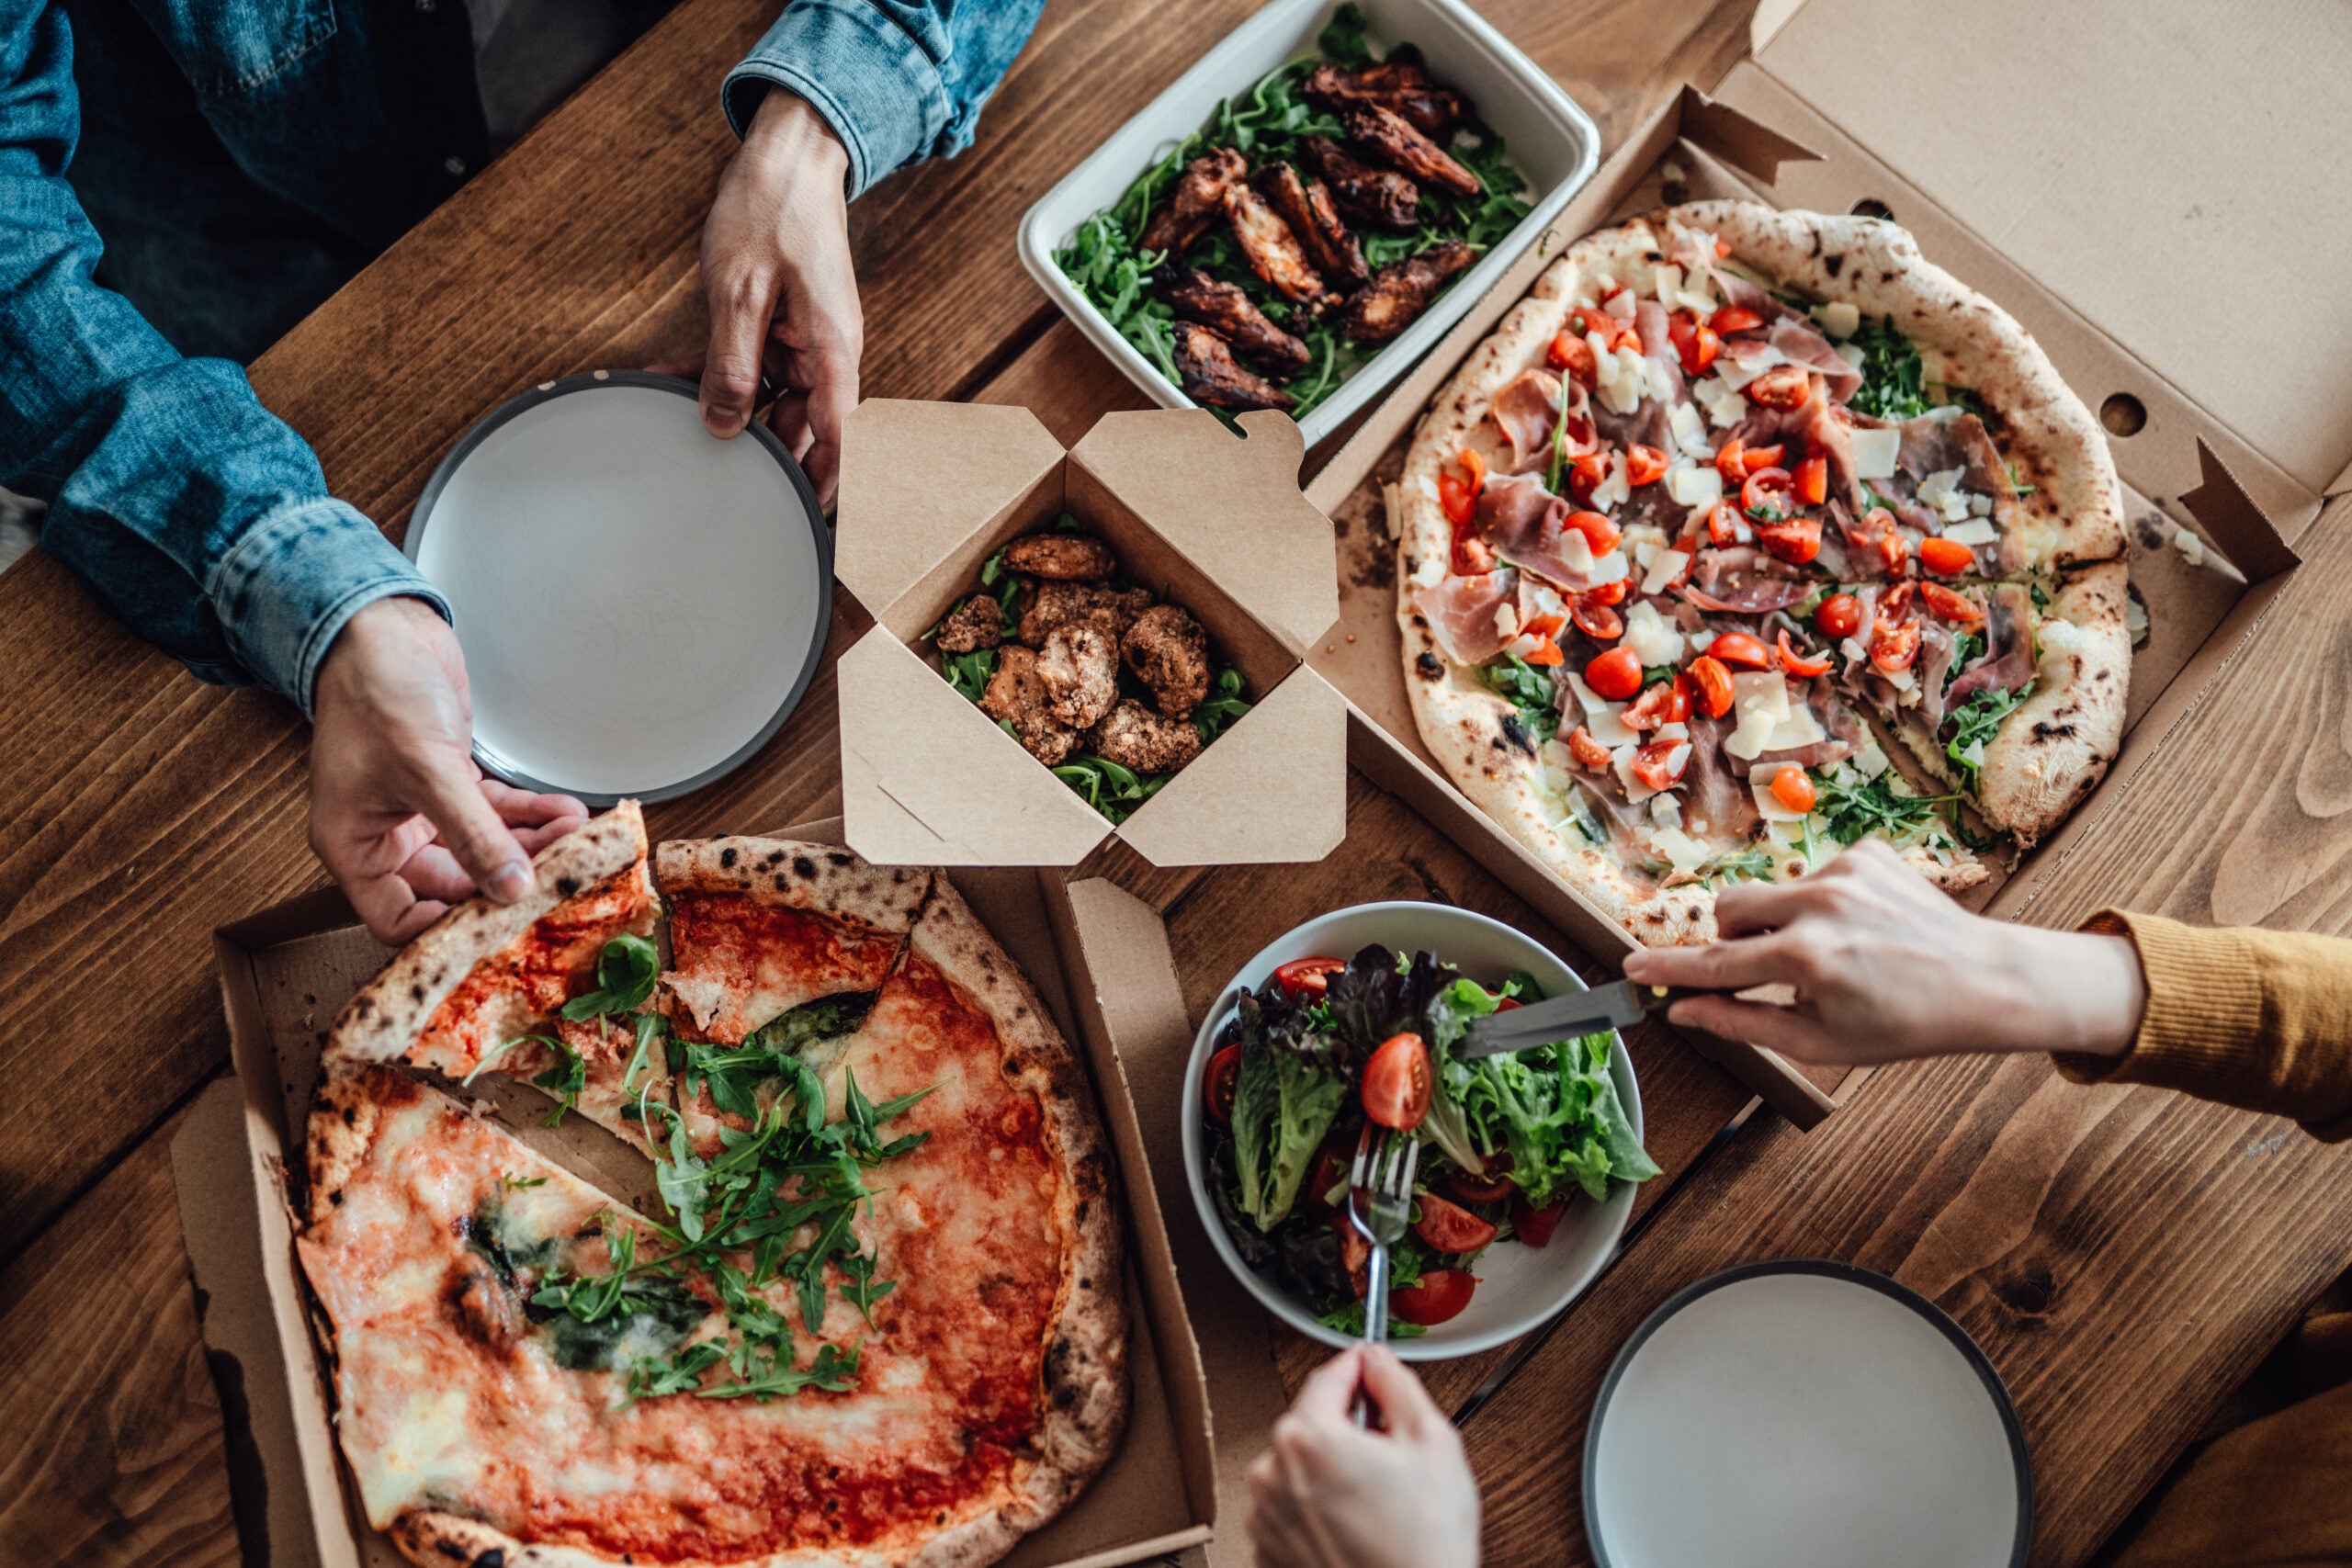 Overhead shot of woman eating green salad while sharing pizza at the dining table. Food delivery.